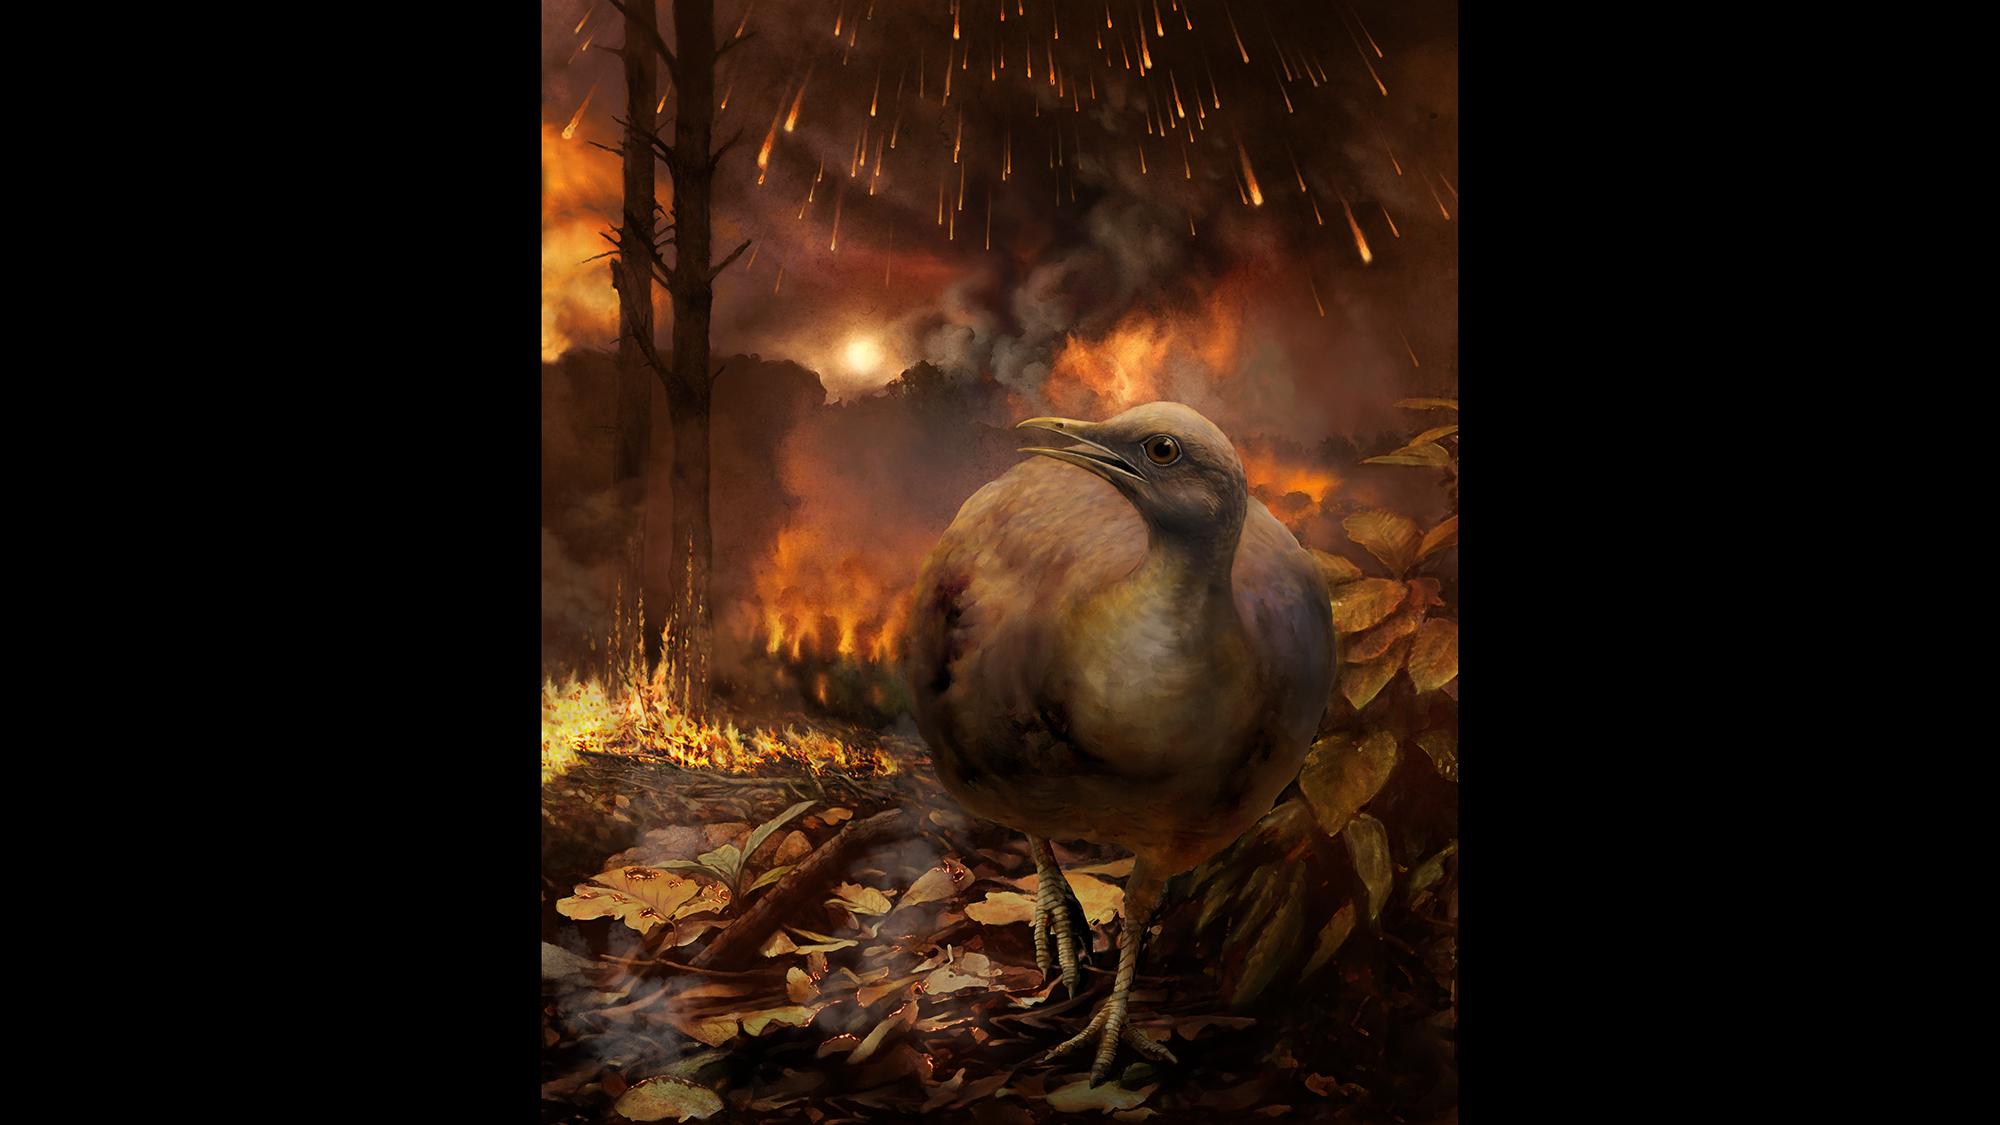 An illustration showing the impact of the Chicxulub asteroid about 66 million years ago, which led to the extinction of dinosaurs and also killed tree-dwelling birds. (Phillip M. Krzeminski)